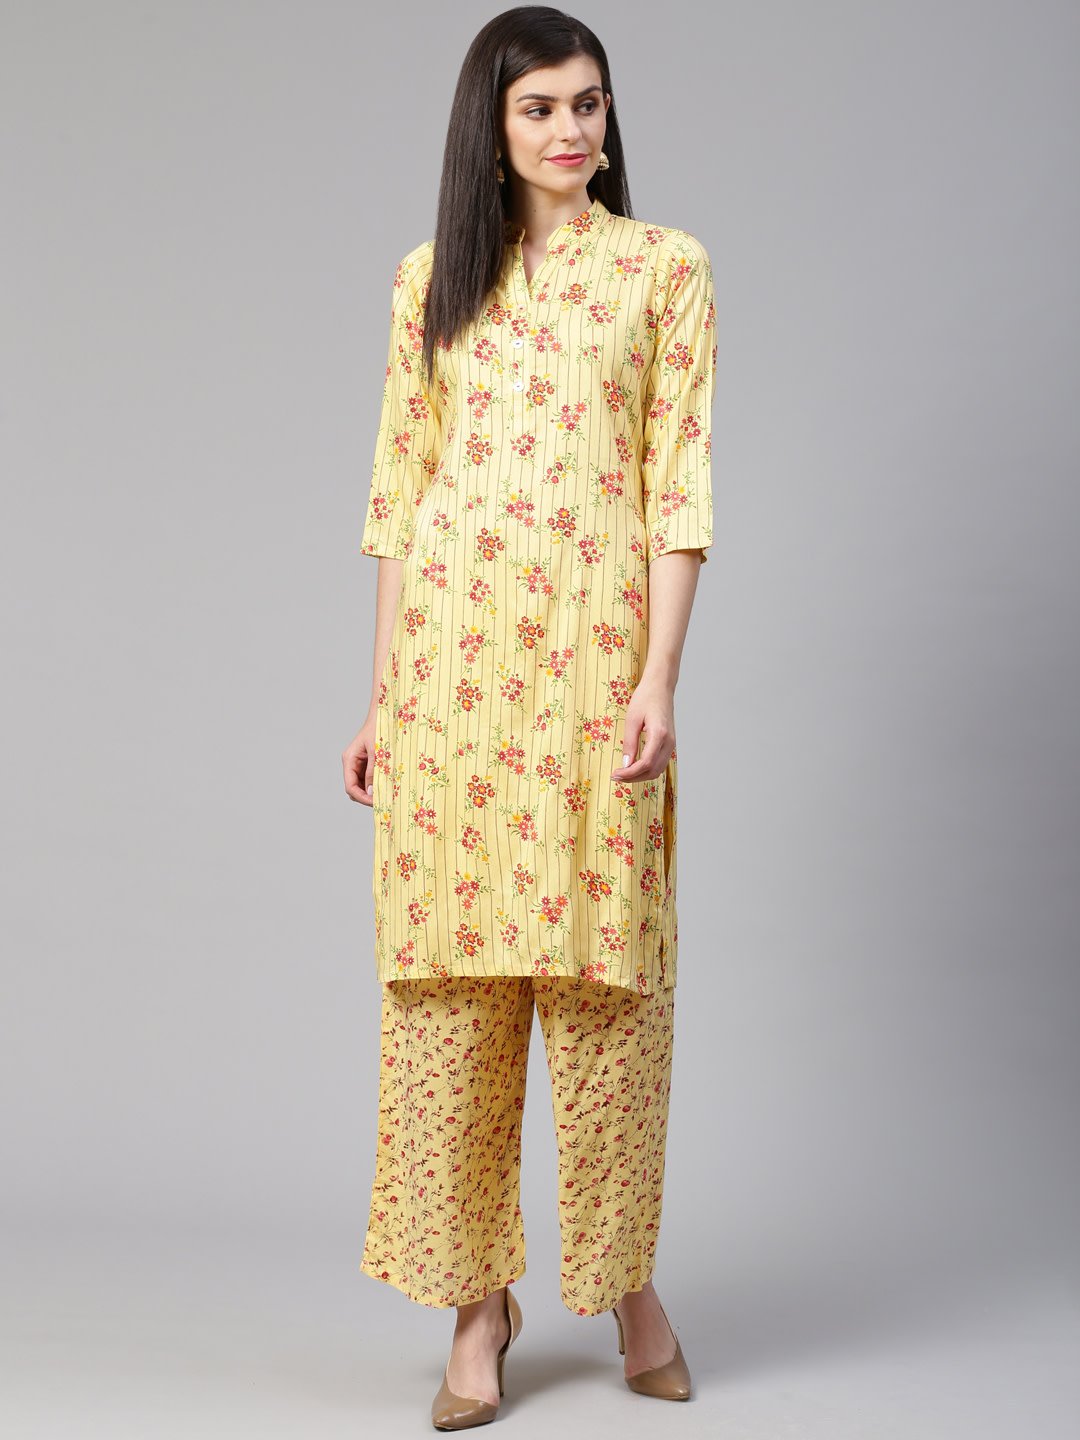 Women's Yellow Coloured & Red Floral Print Kurta with Palazzos - Jompers